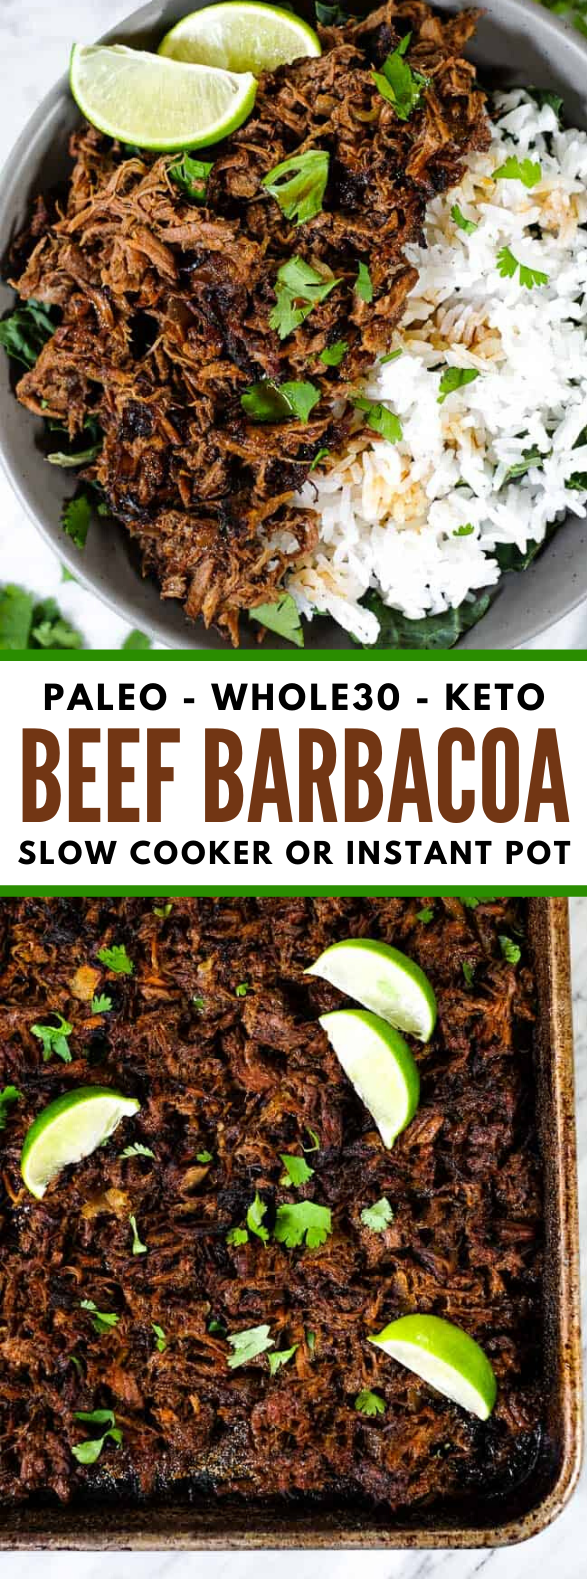 BEEF BARBACOA (PALEO, WHOLE30 + KETO) SLOW COOKER OR INSTANT POT #healhty #diet